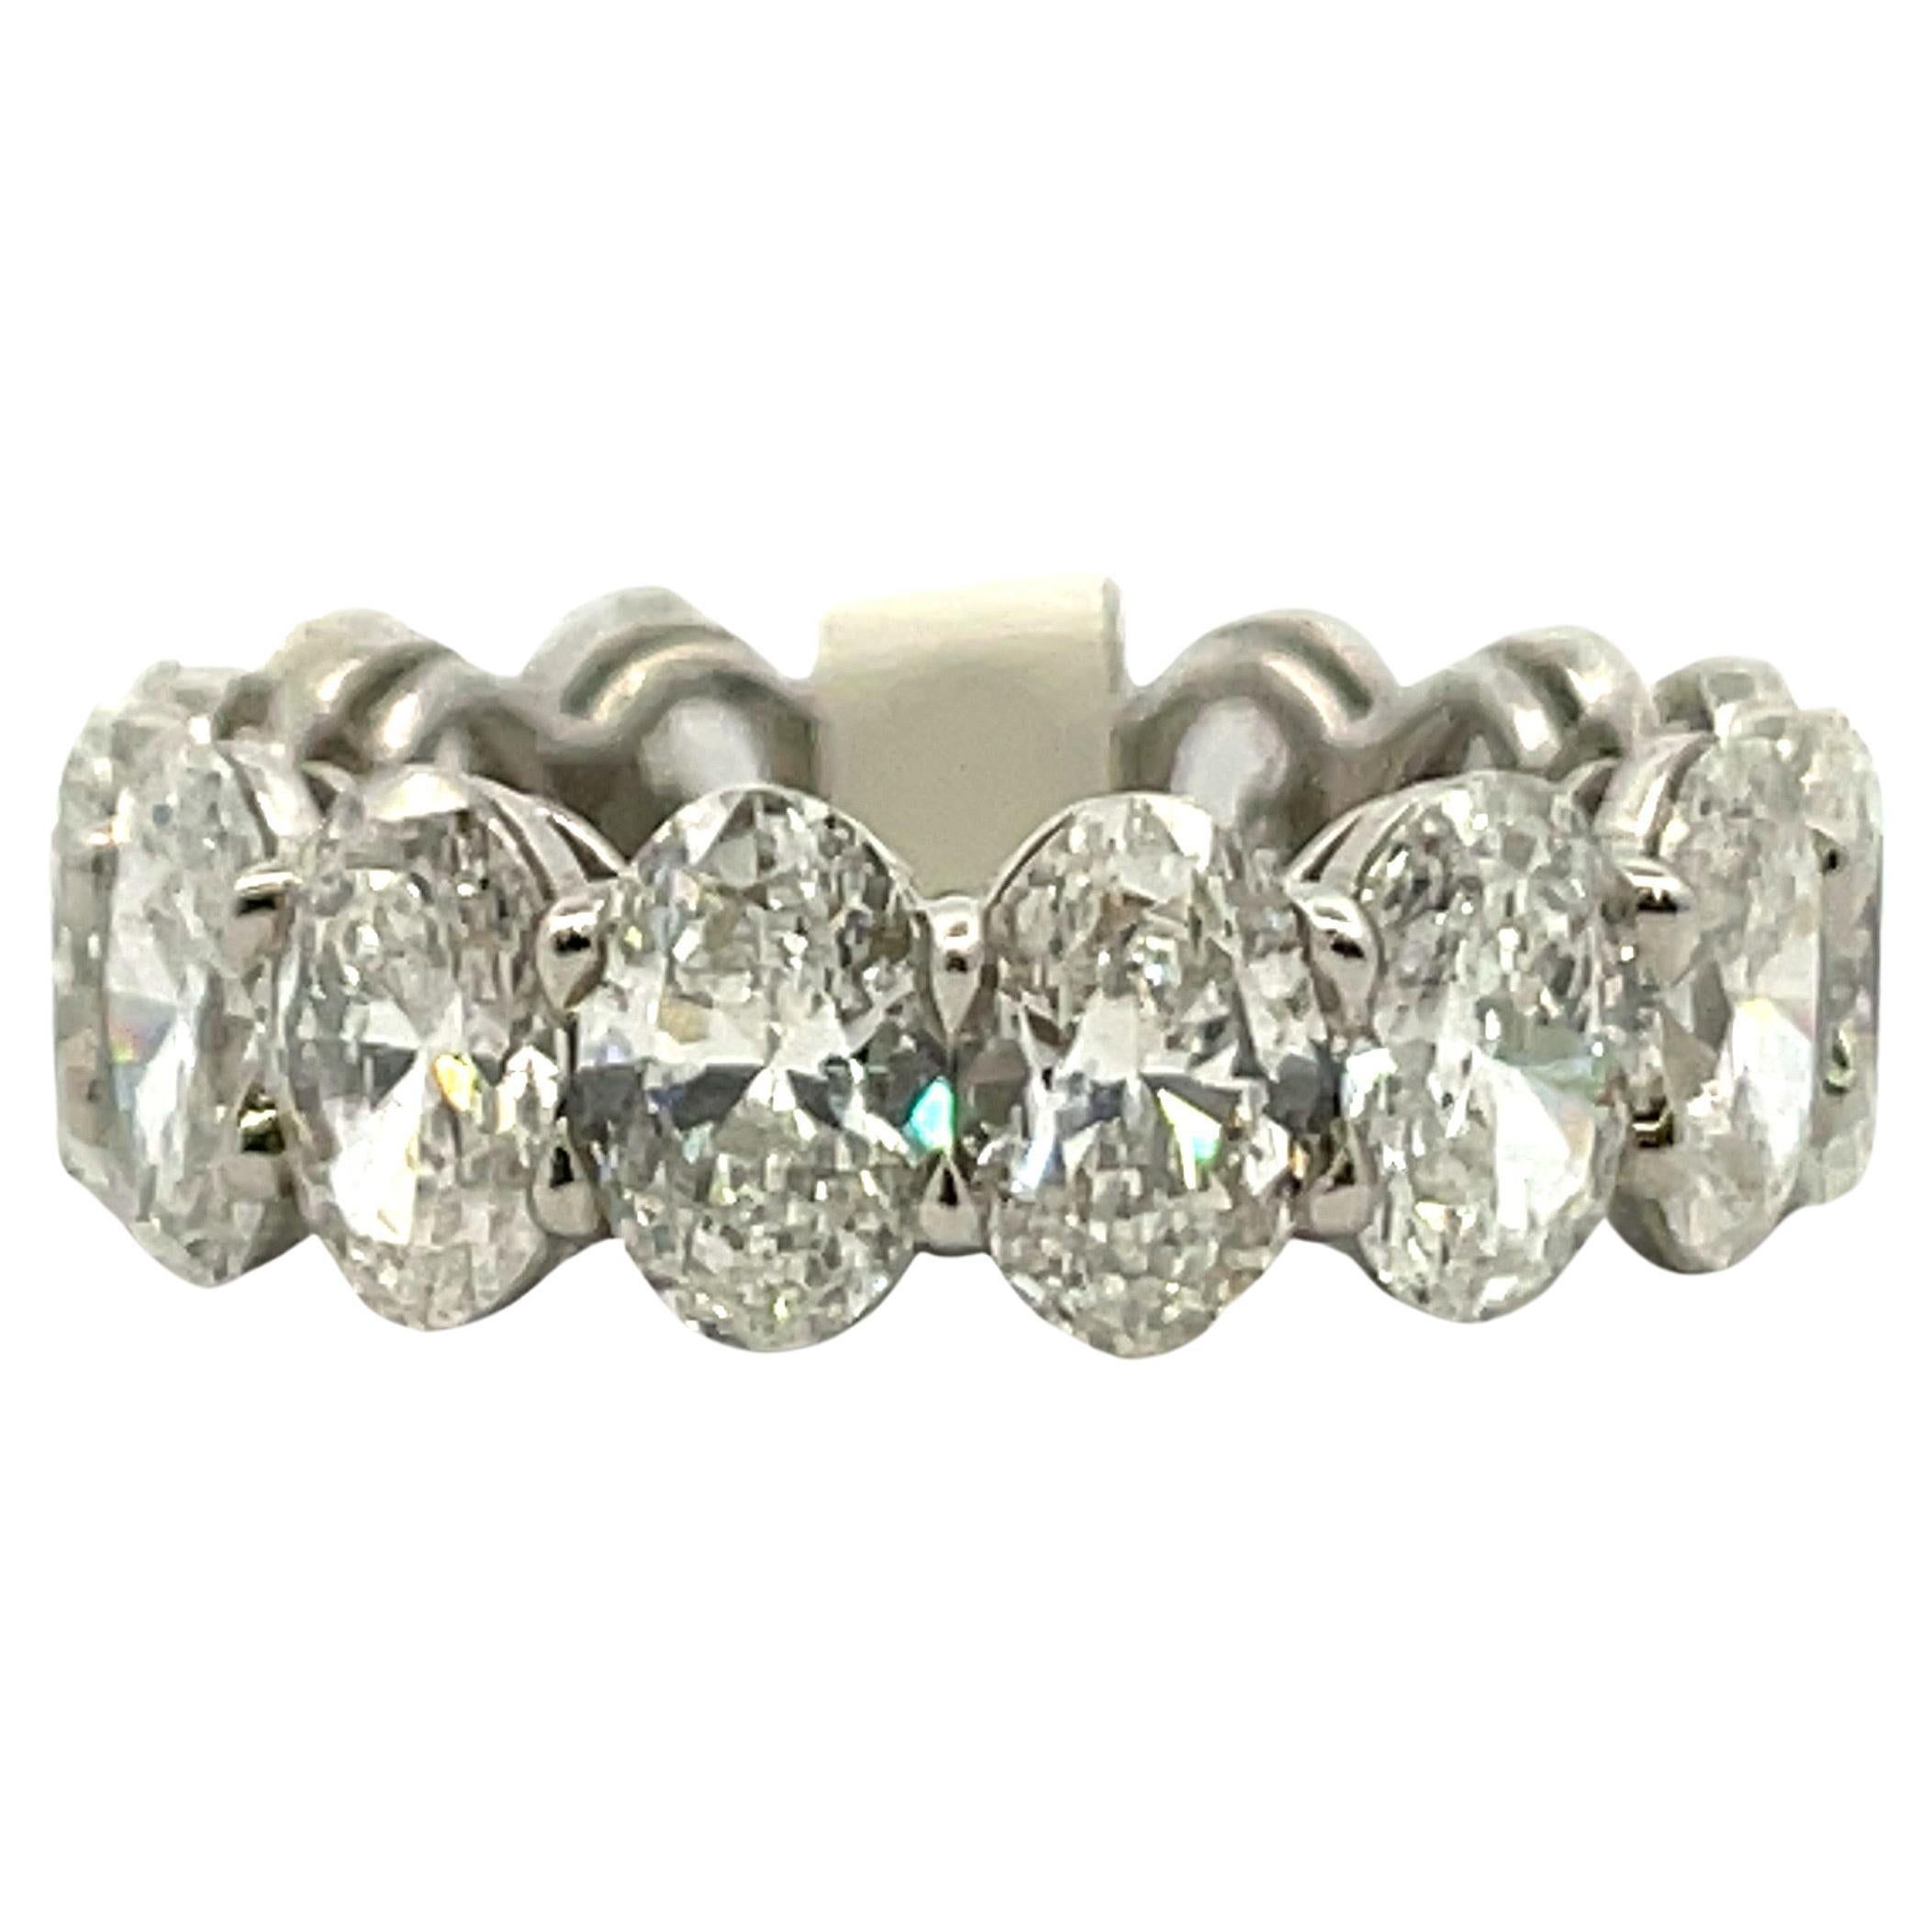 Magnificent GIA Certified Eternity Ring featuring 16 Oval Cut Diamonds weighing 8.32 Carats, crafted in Platinum. 
Average 0.52 points 
All diamonds are GIA Certified with gradings from D-F Color, VVS1-VS2 Clarity. Perfectly Matched!
Very